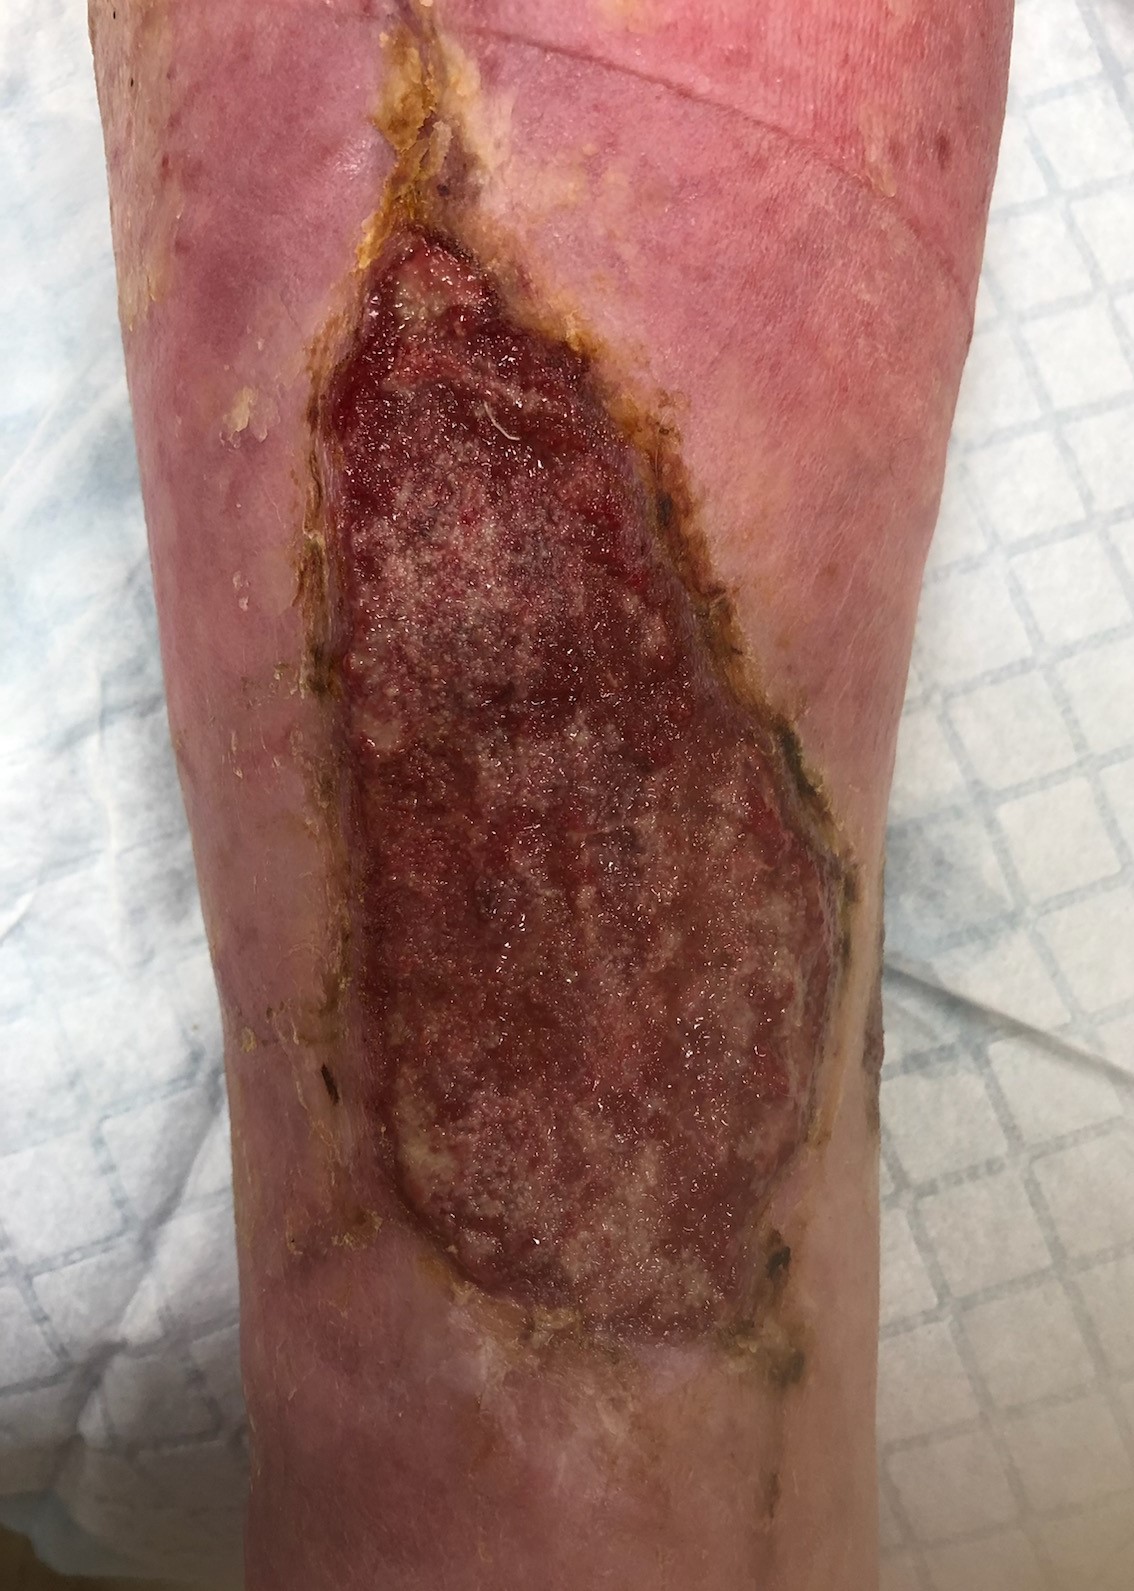 Top wound following first treatment plan with Restore Wound Care